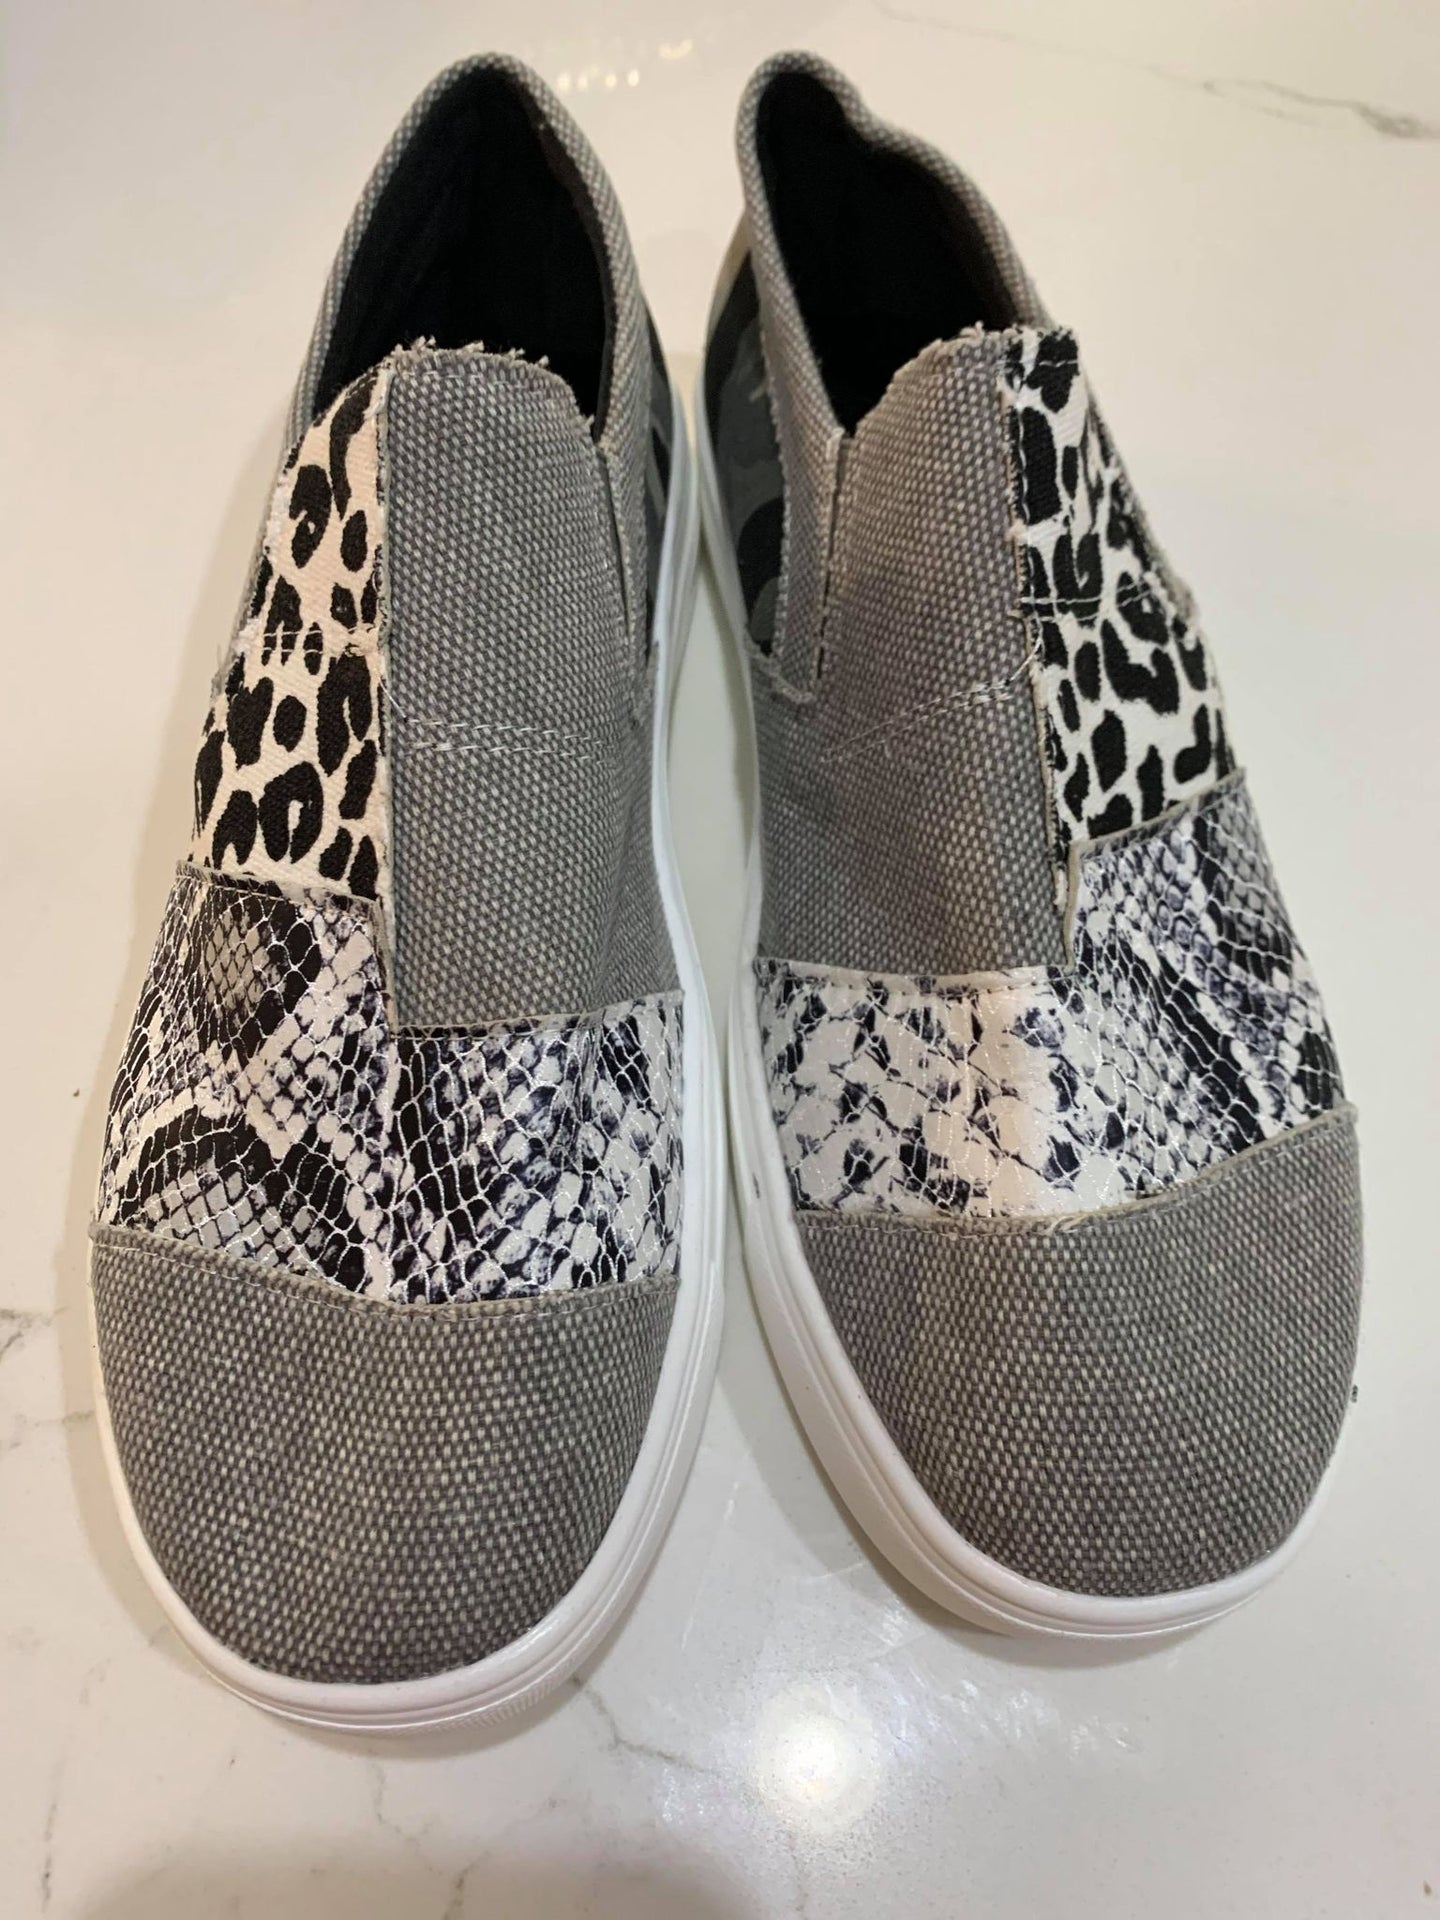 Gray Snake Leopard Mixed Print Slip-on Canvas Slip on Shoes